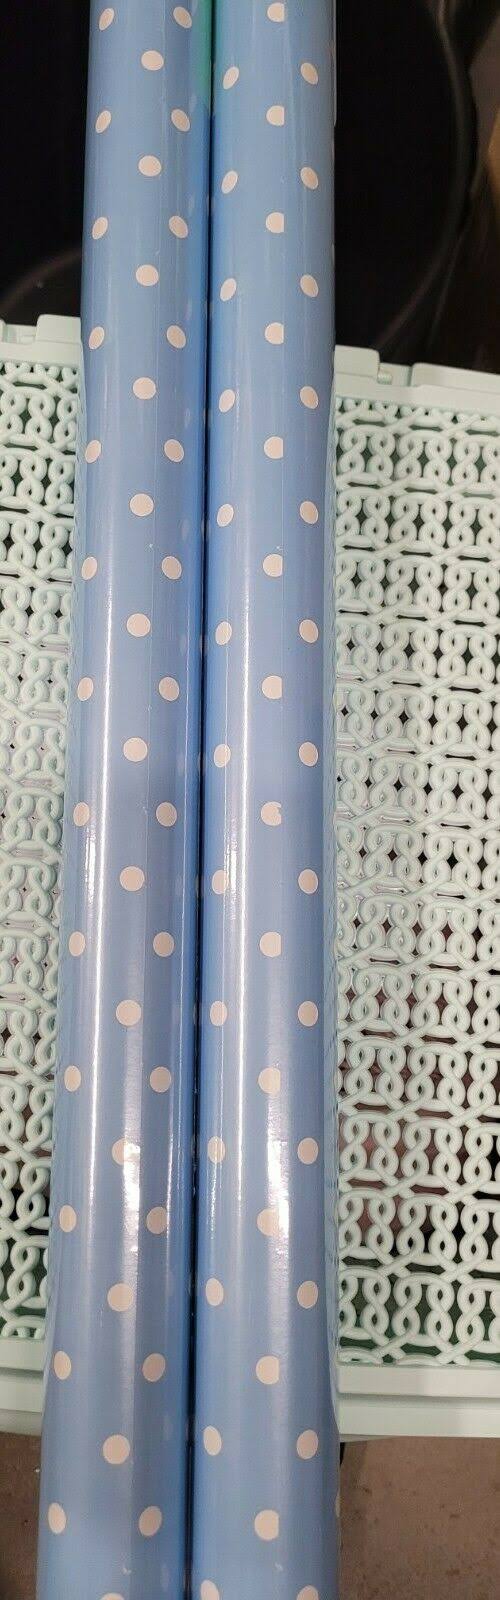 2 x 3m Gift Wrapping Paper Roll Birthday baby shower anniversary Pastel Blue